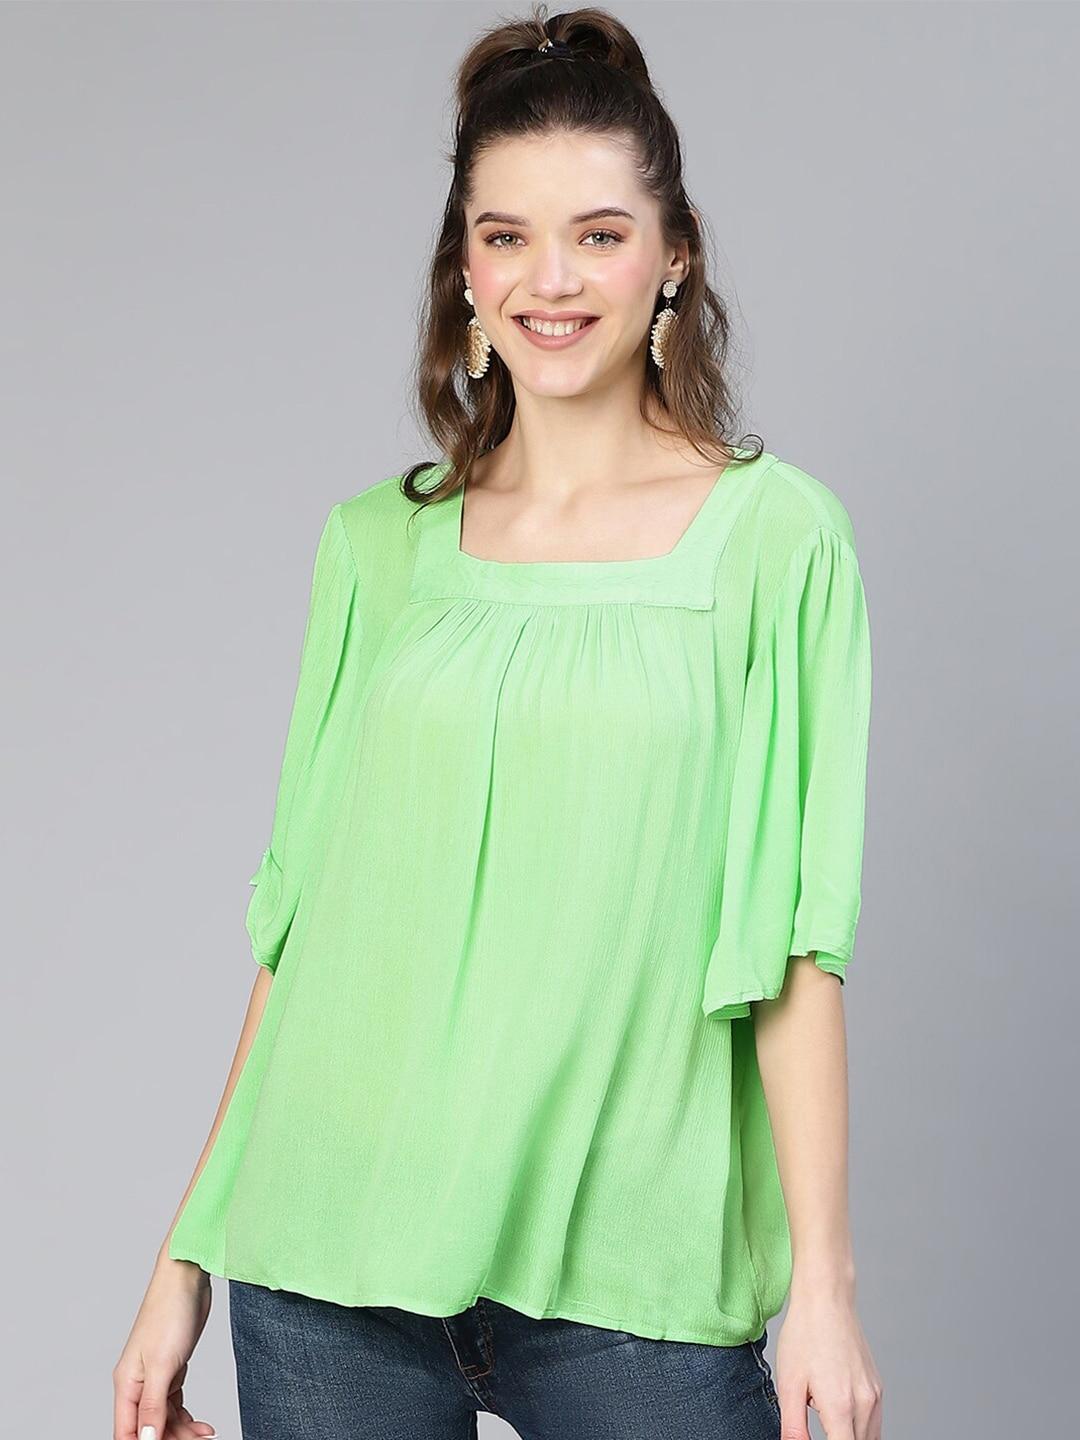 oxolloxo-solid-square-neck-flared-sleeves-a-line-top